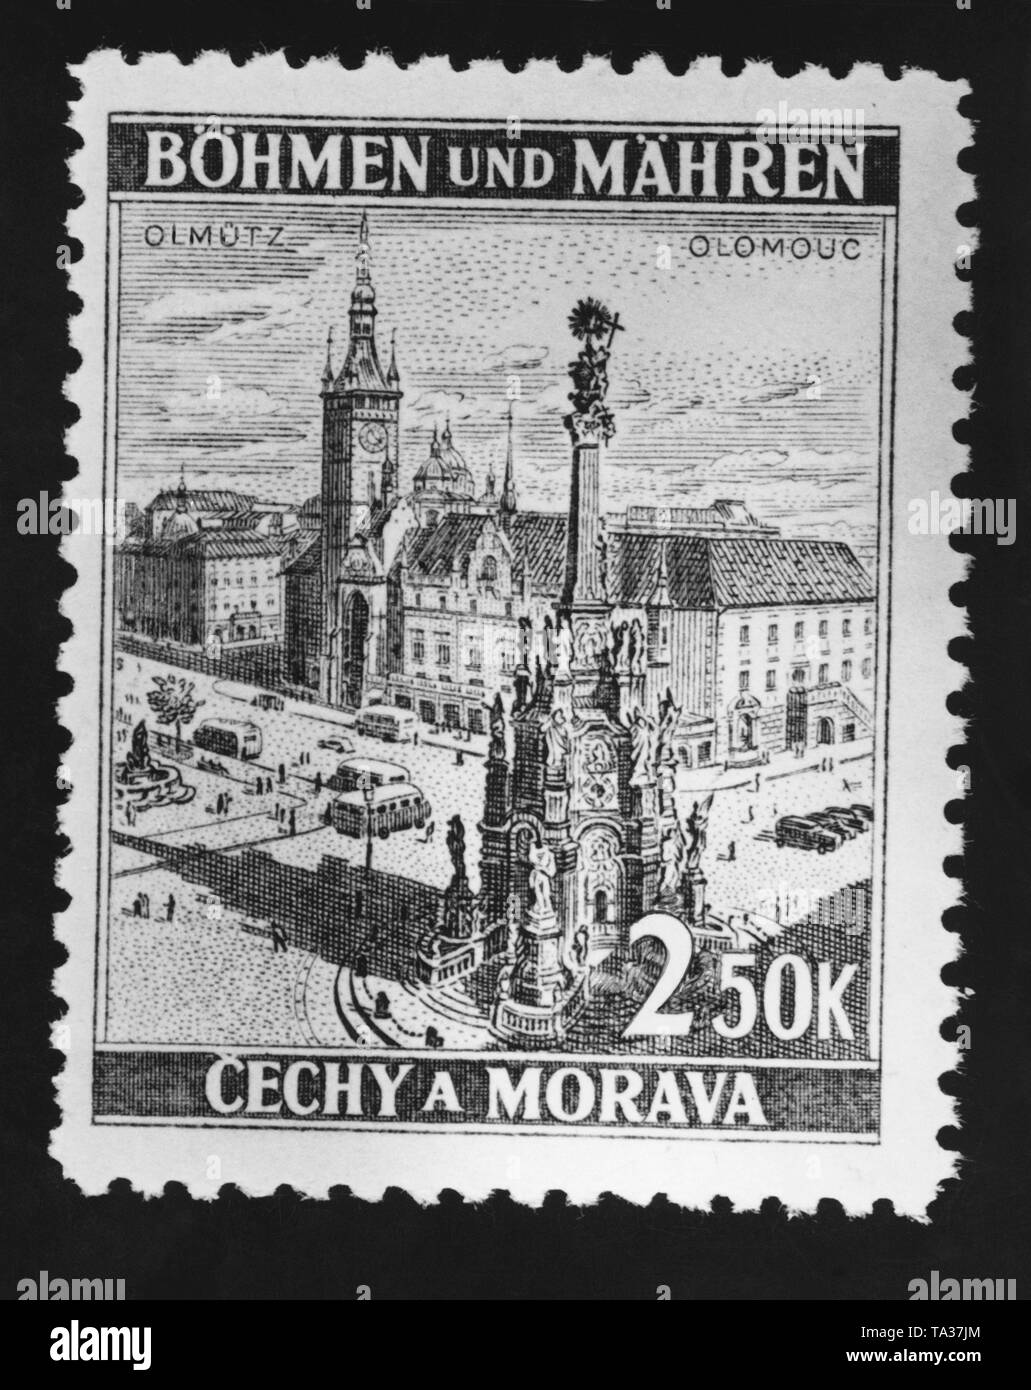 Stamp from the Protectorate of Bohemia and Moravia. The stamp depicts the city of Olomouc. Its value is 250 Czech korunas. Stock Photo